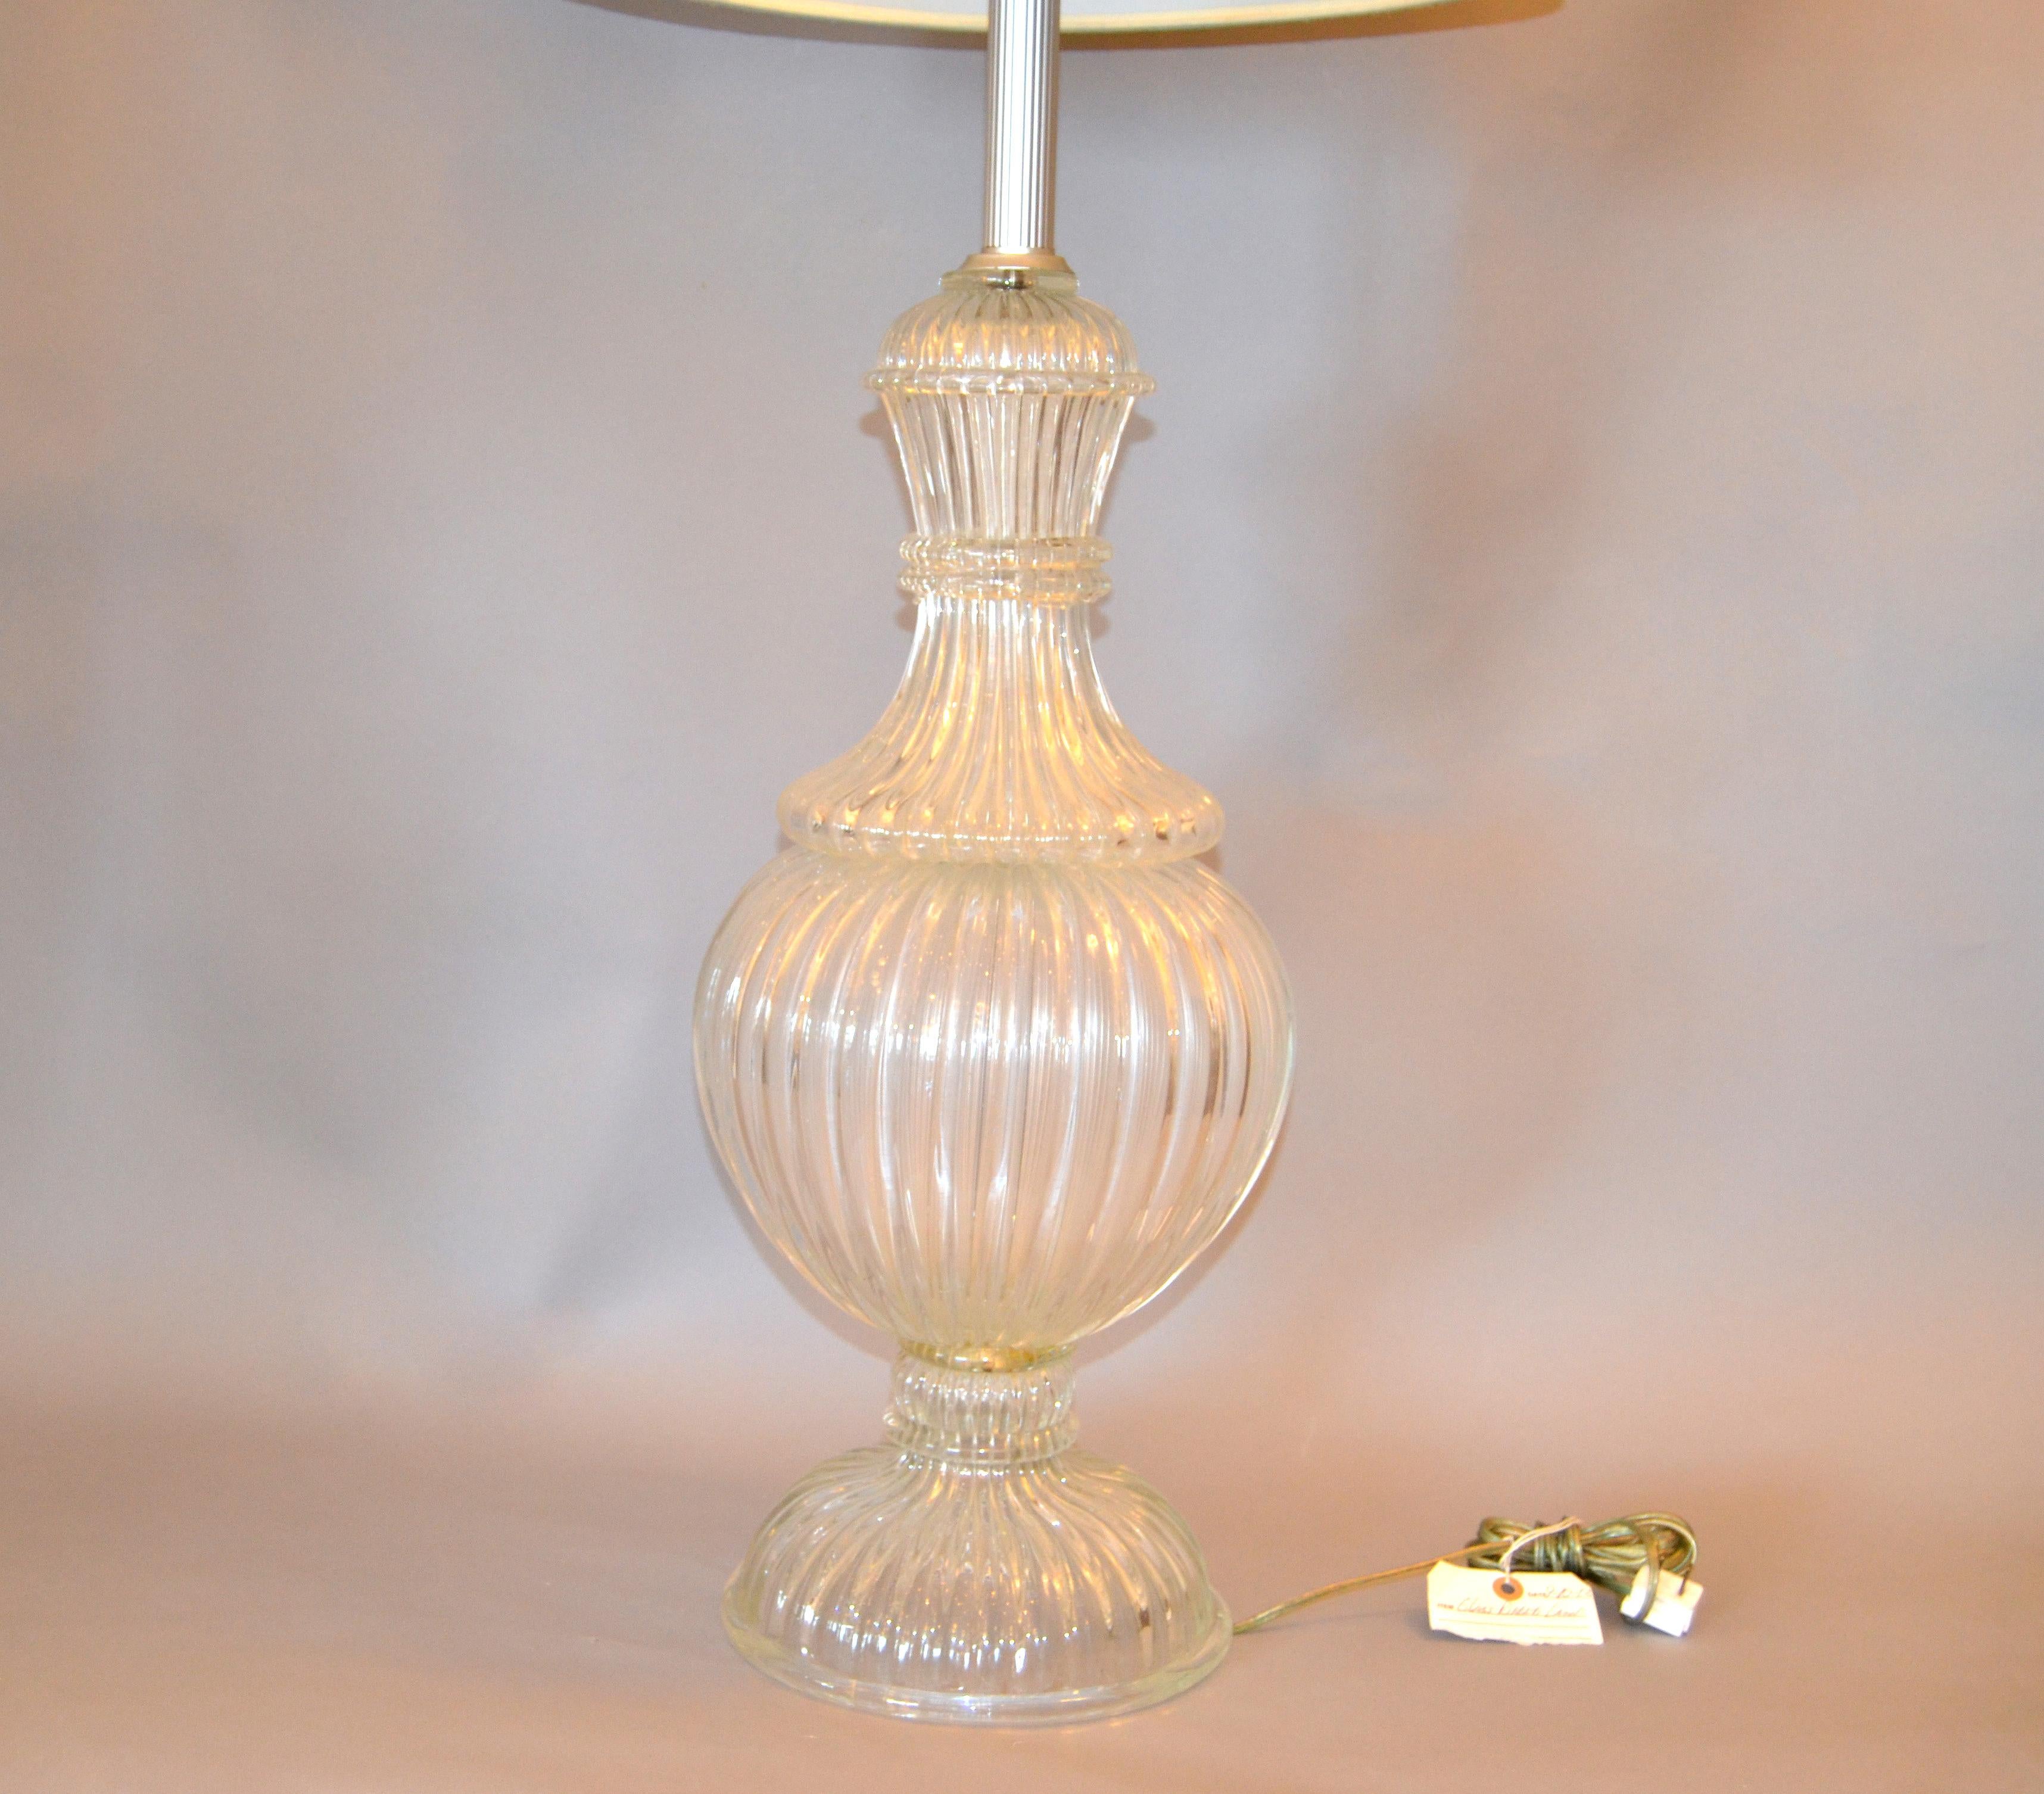 Italian tall clear hand blown feminine-shaped ribbed Murano glass table lamp.
The top has an aluminum ribbed neck.
In perfect working condition and uses a max. 60 watts light bulb.
No shade.